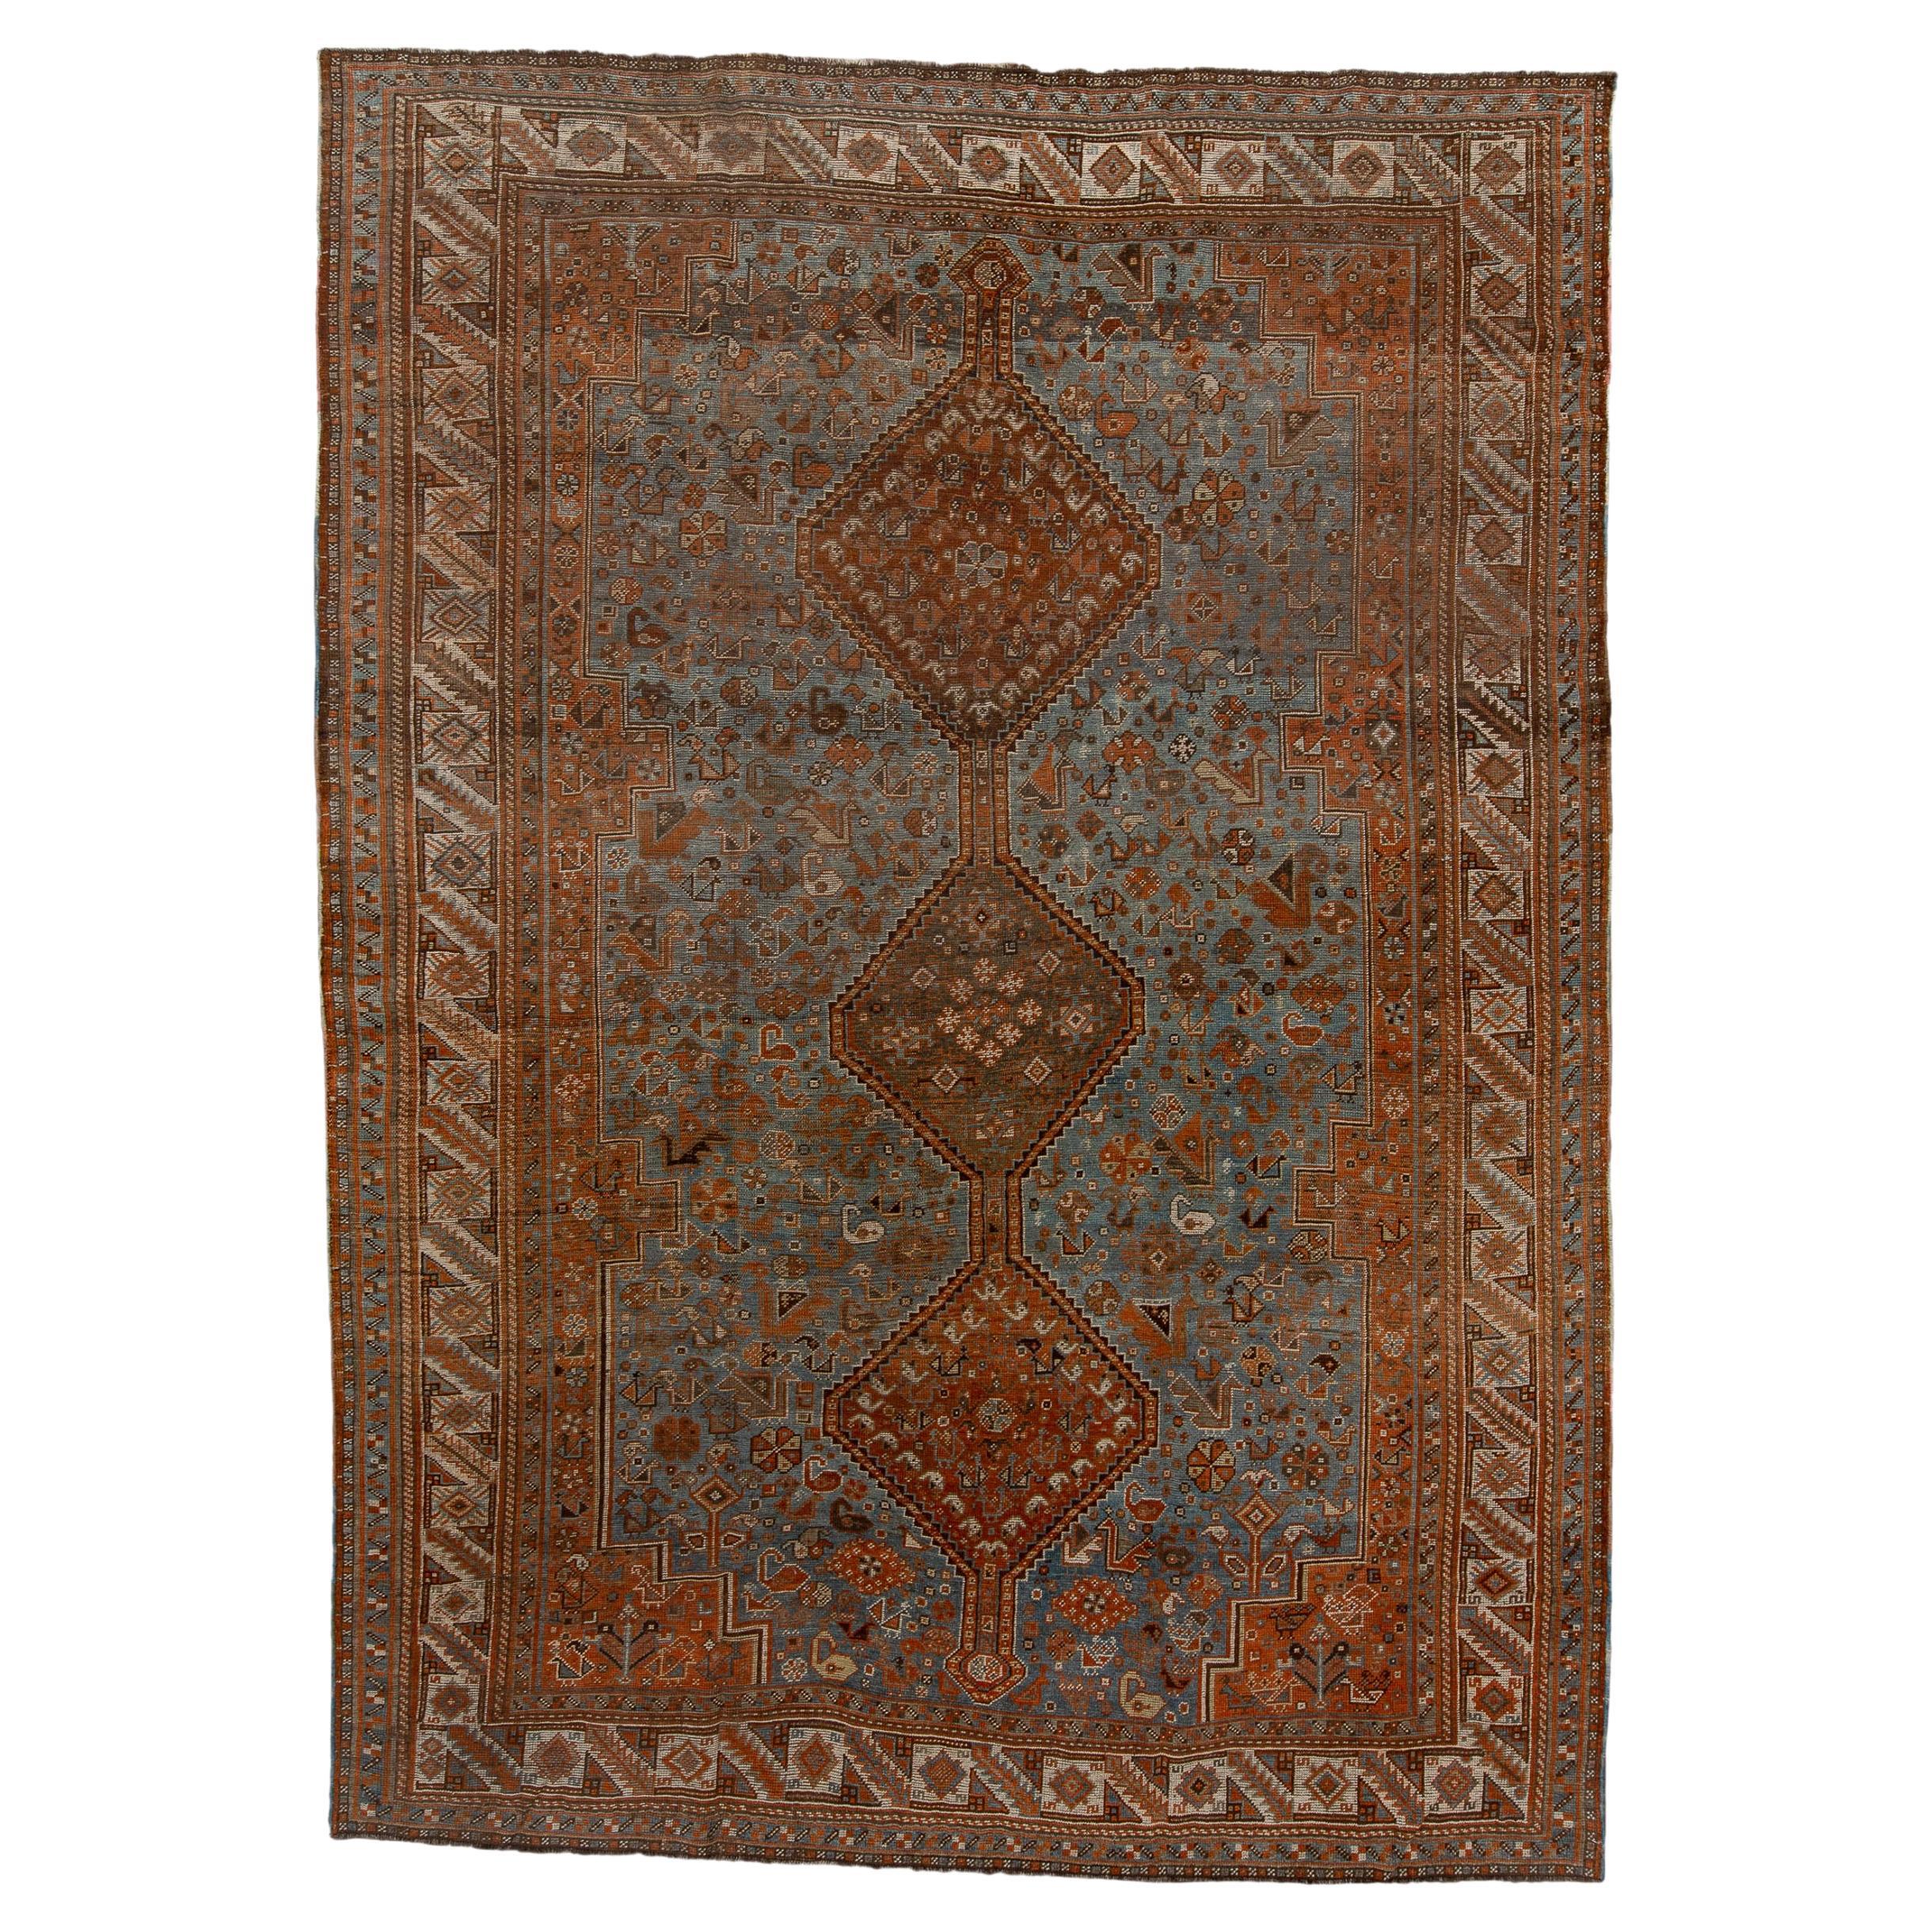 Antique Tribal Shiraz with Light Blue Field and Rosette Border